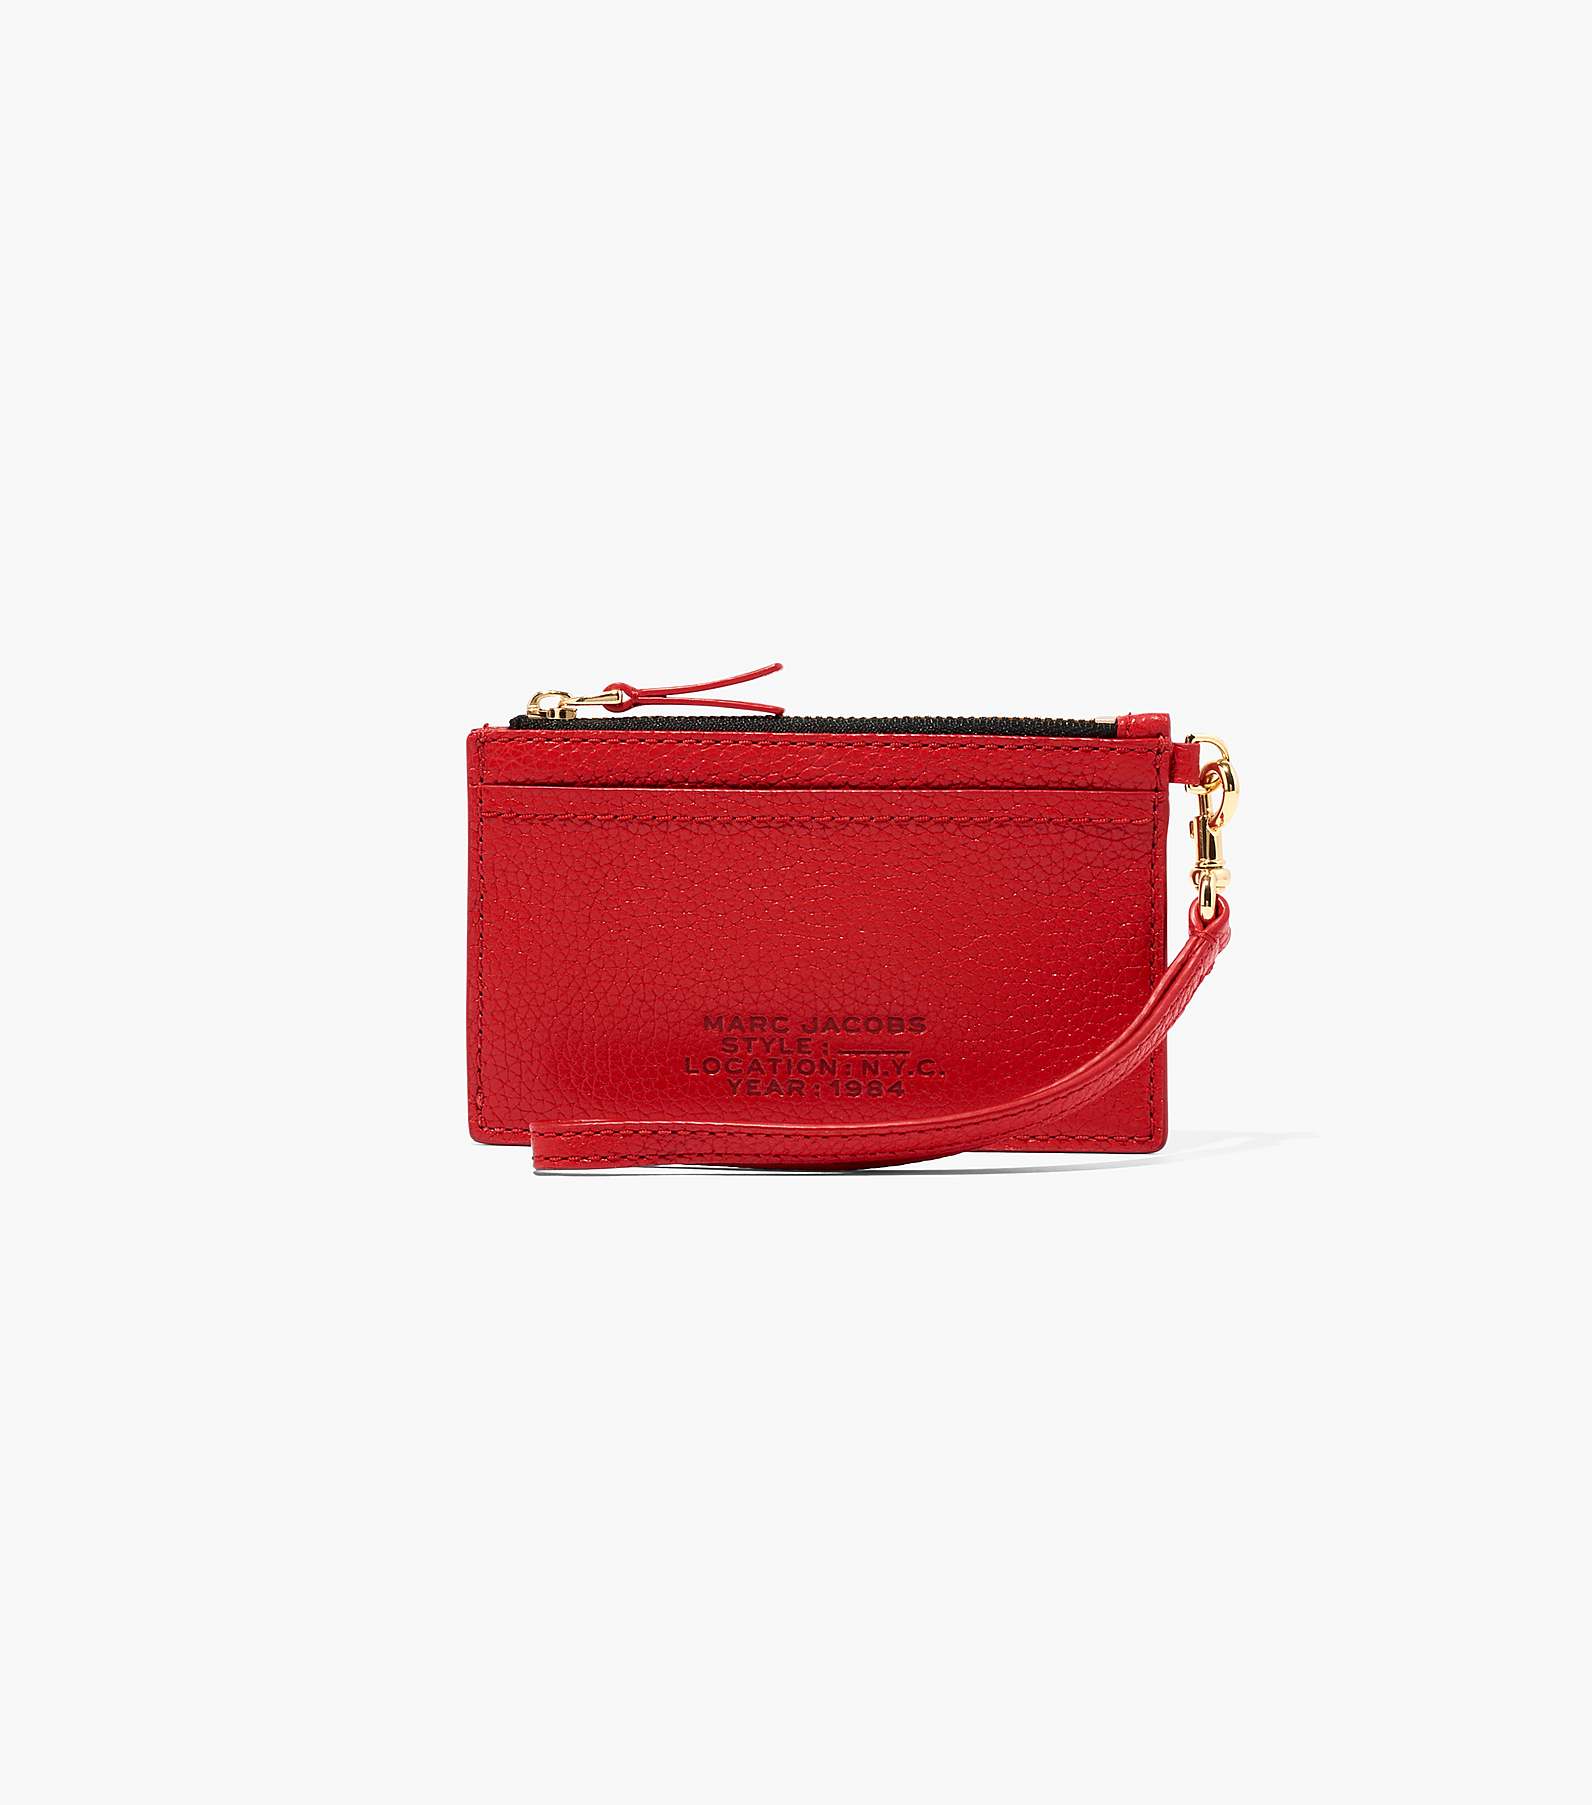 The Leather Top Zip Wristlet(View All Wallets)